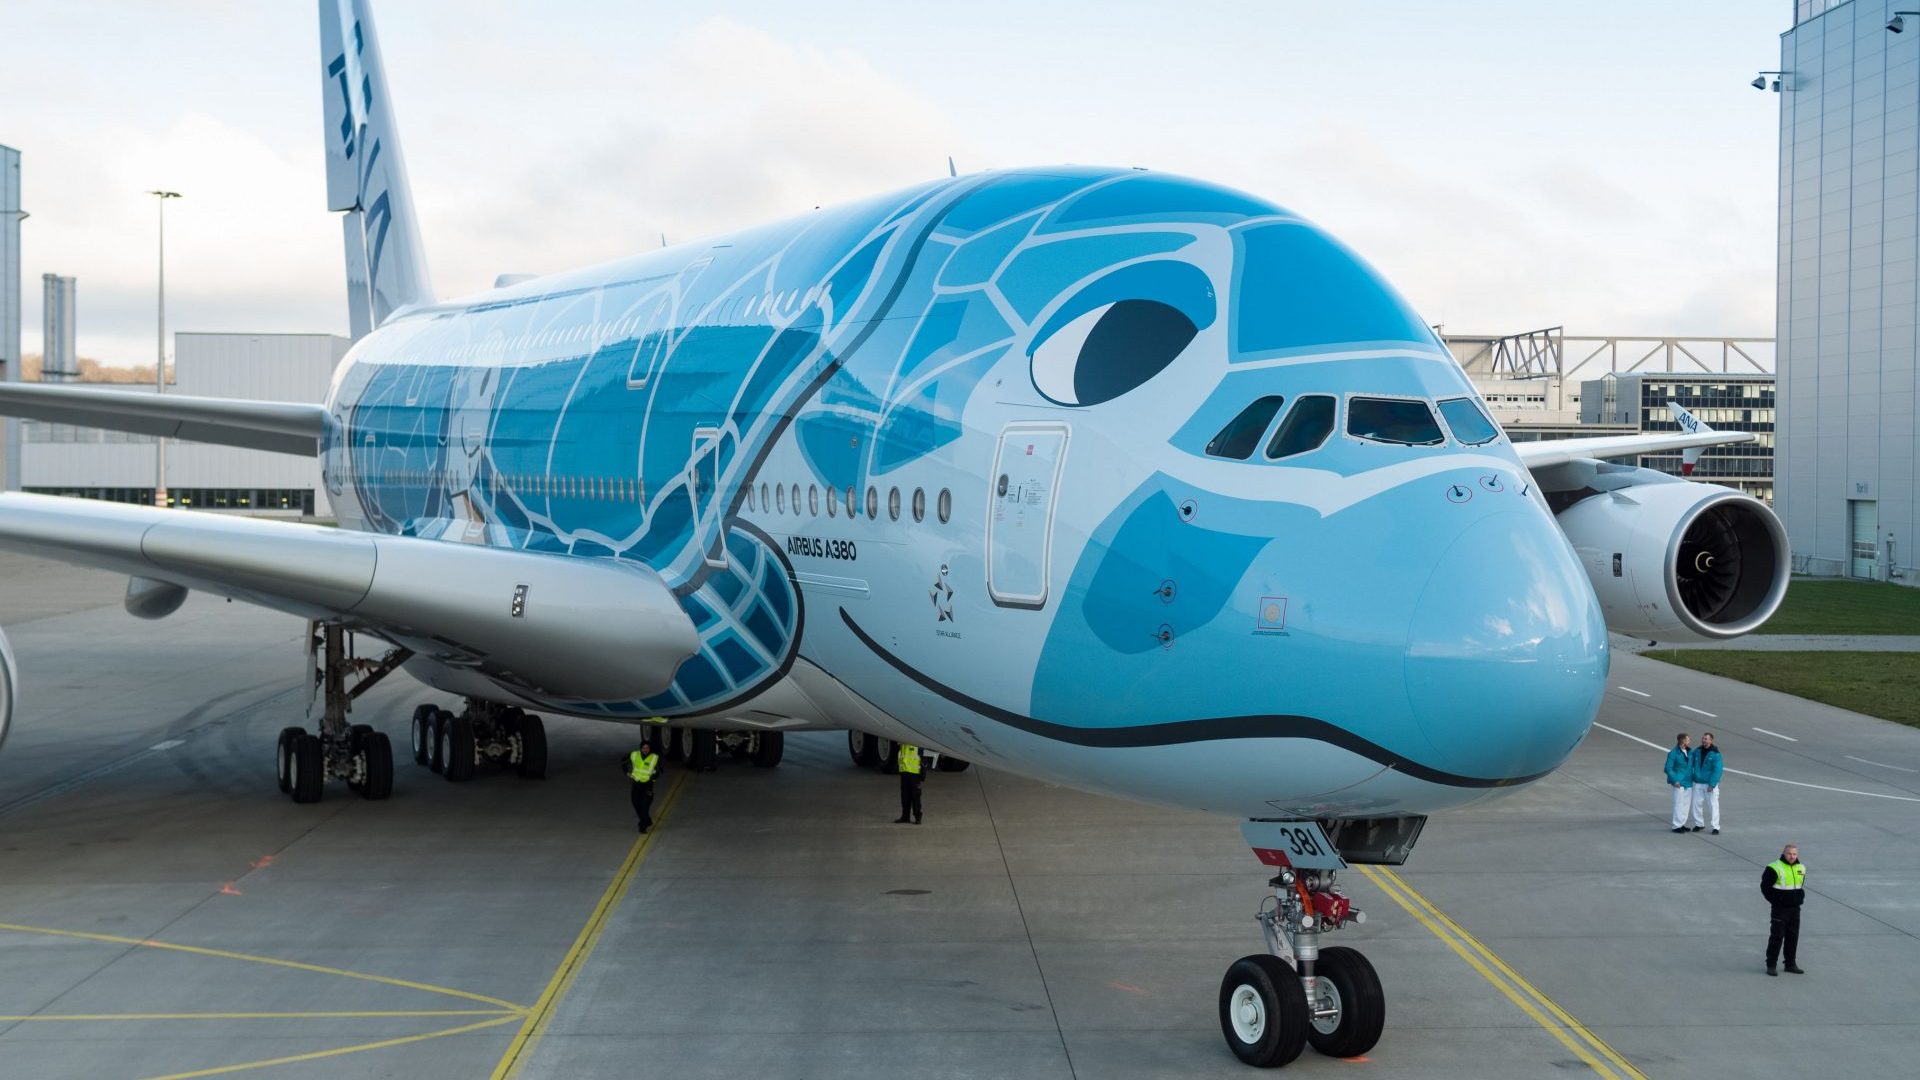 ANA to begin Airbus A380 operations to Hawaii in 2019 | International Flight Network